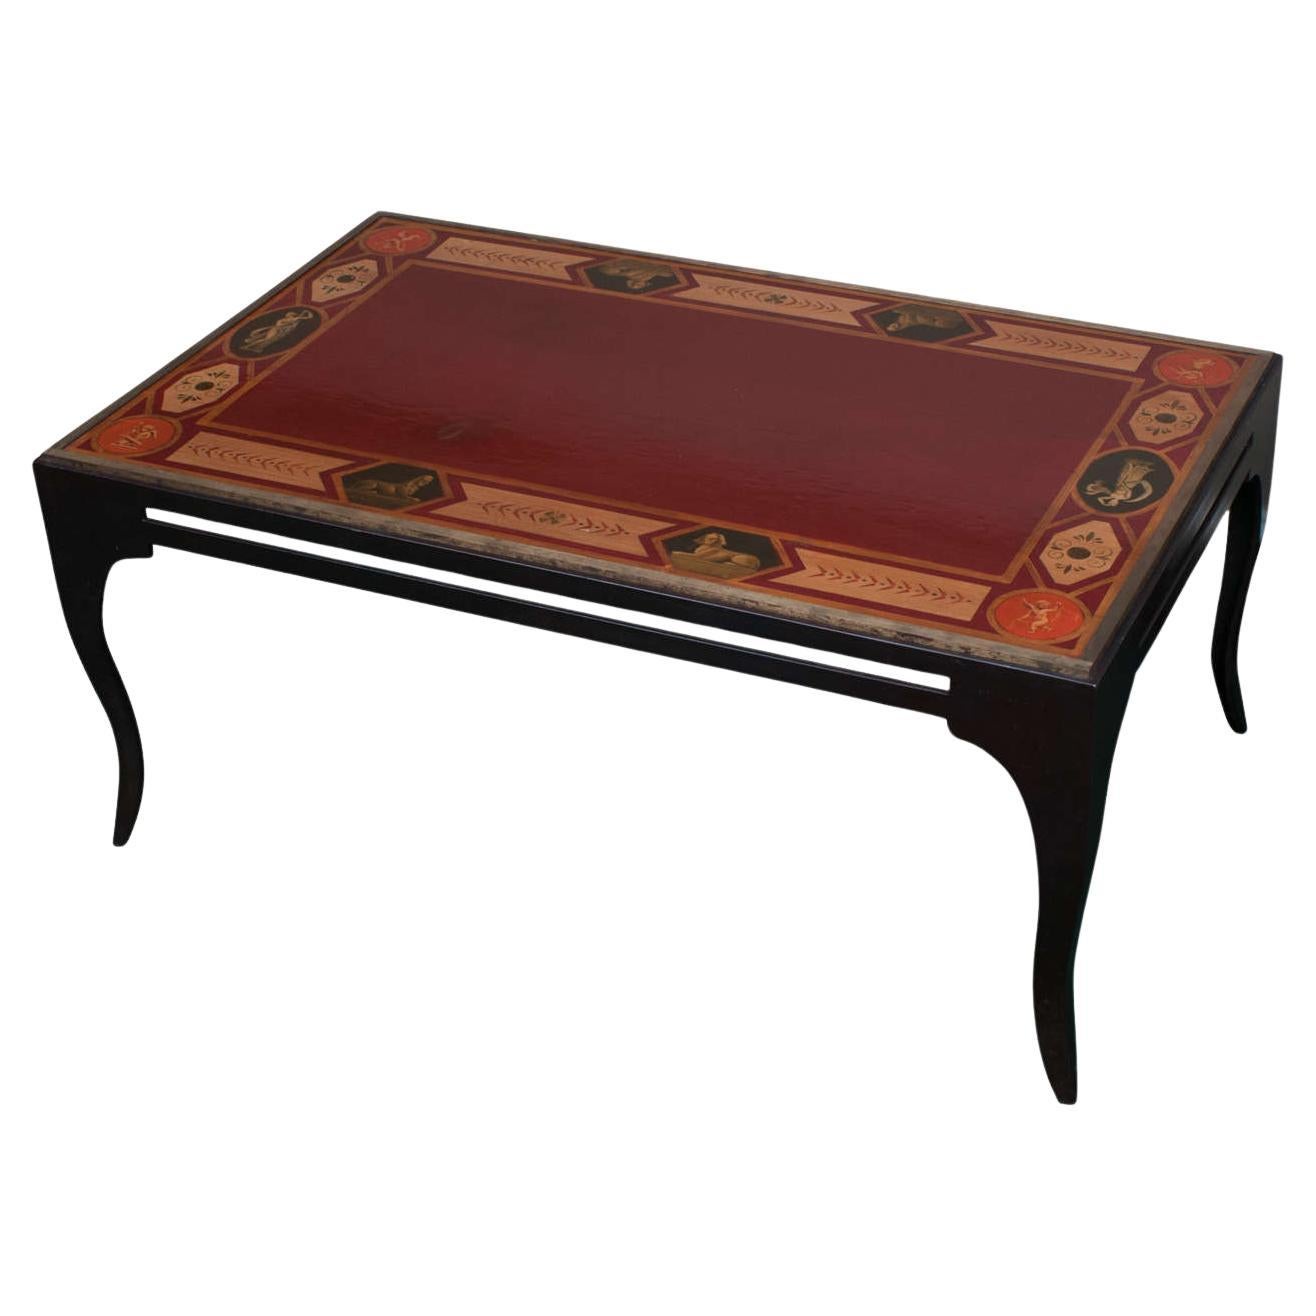 Late 20th Century Egyptian Motif Coffee Table by Brunschwig & Fils For Sale